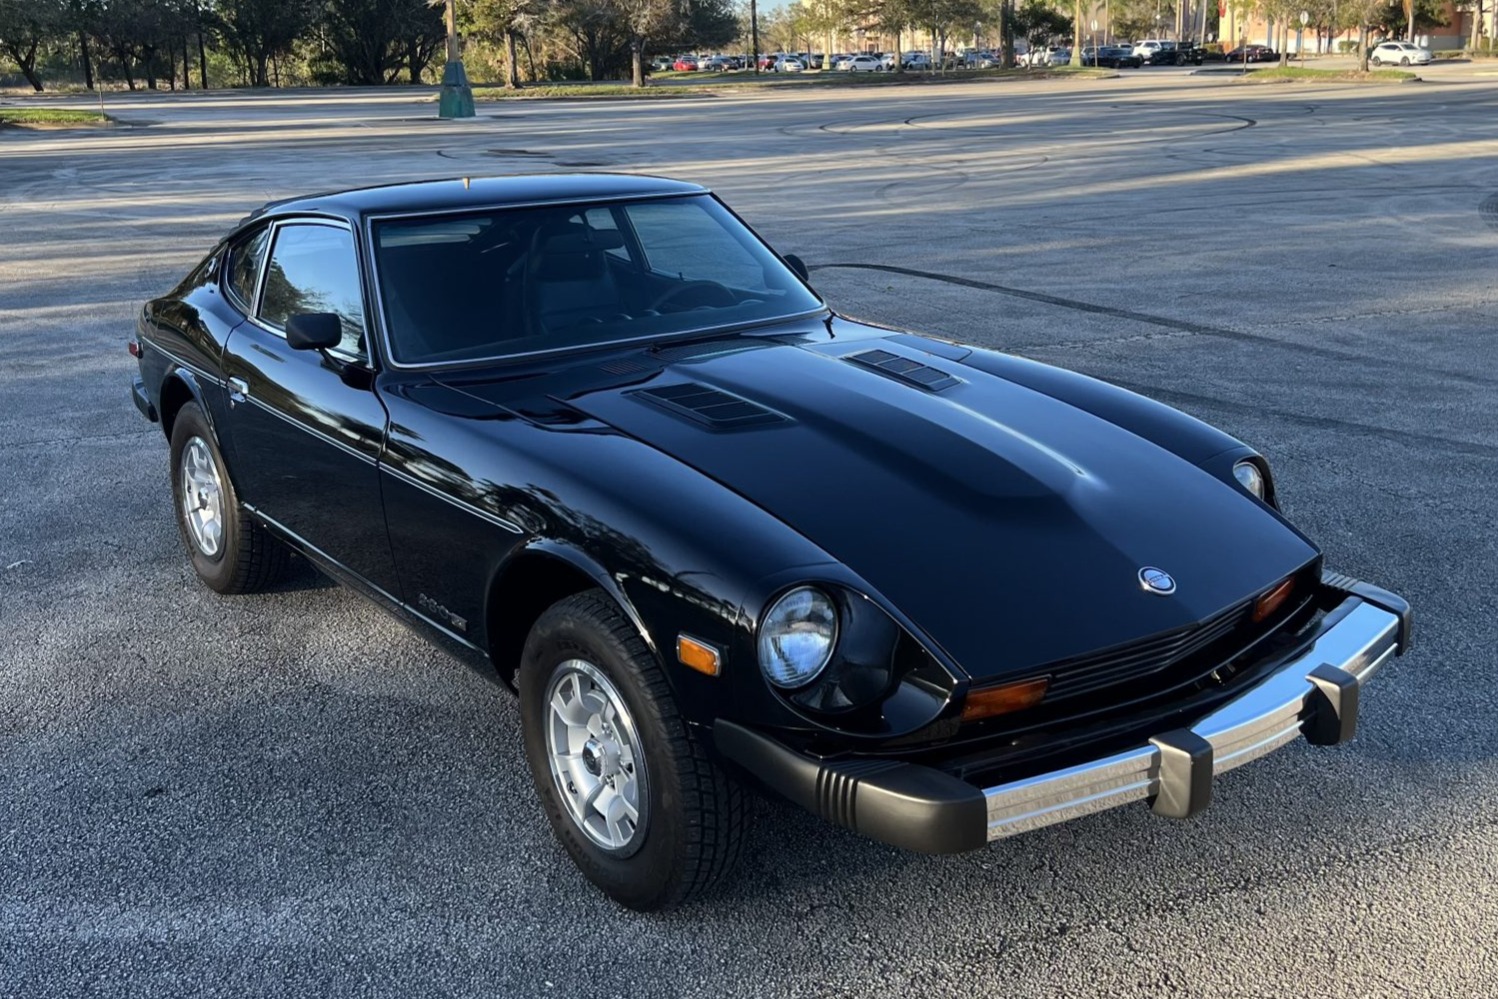 Used 1978 Datsun 280Z Black Pearl Edition 5-Speed Review